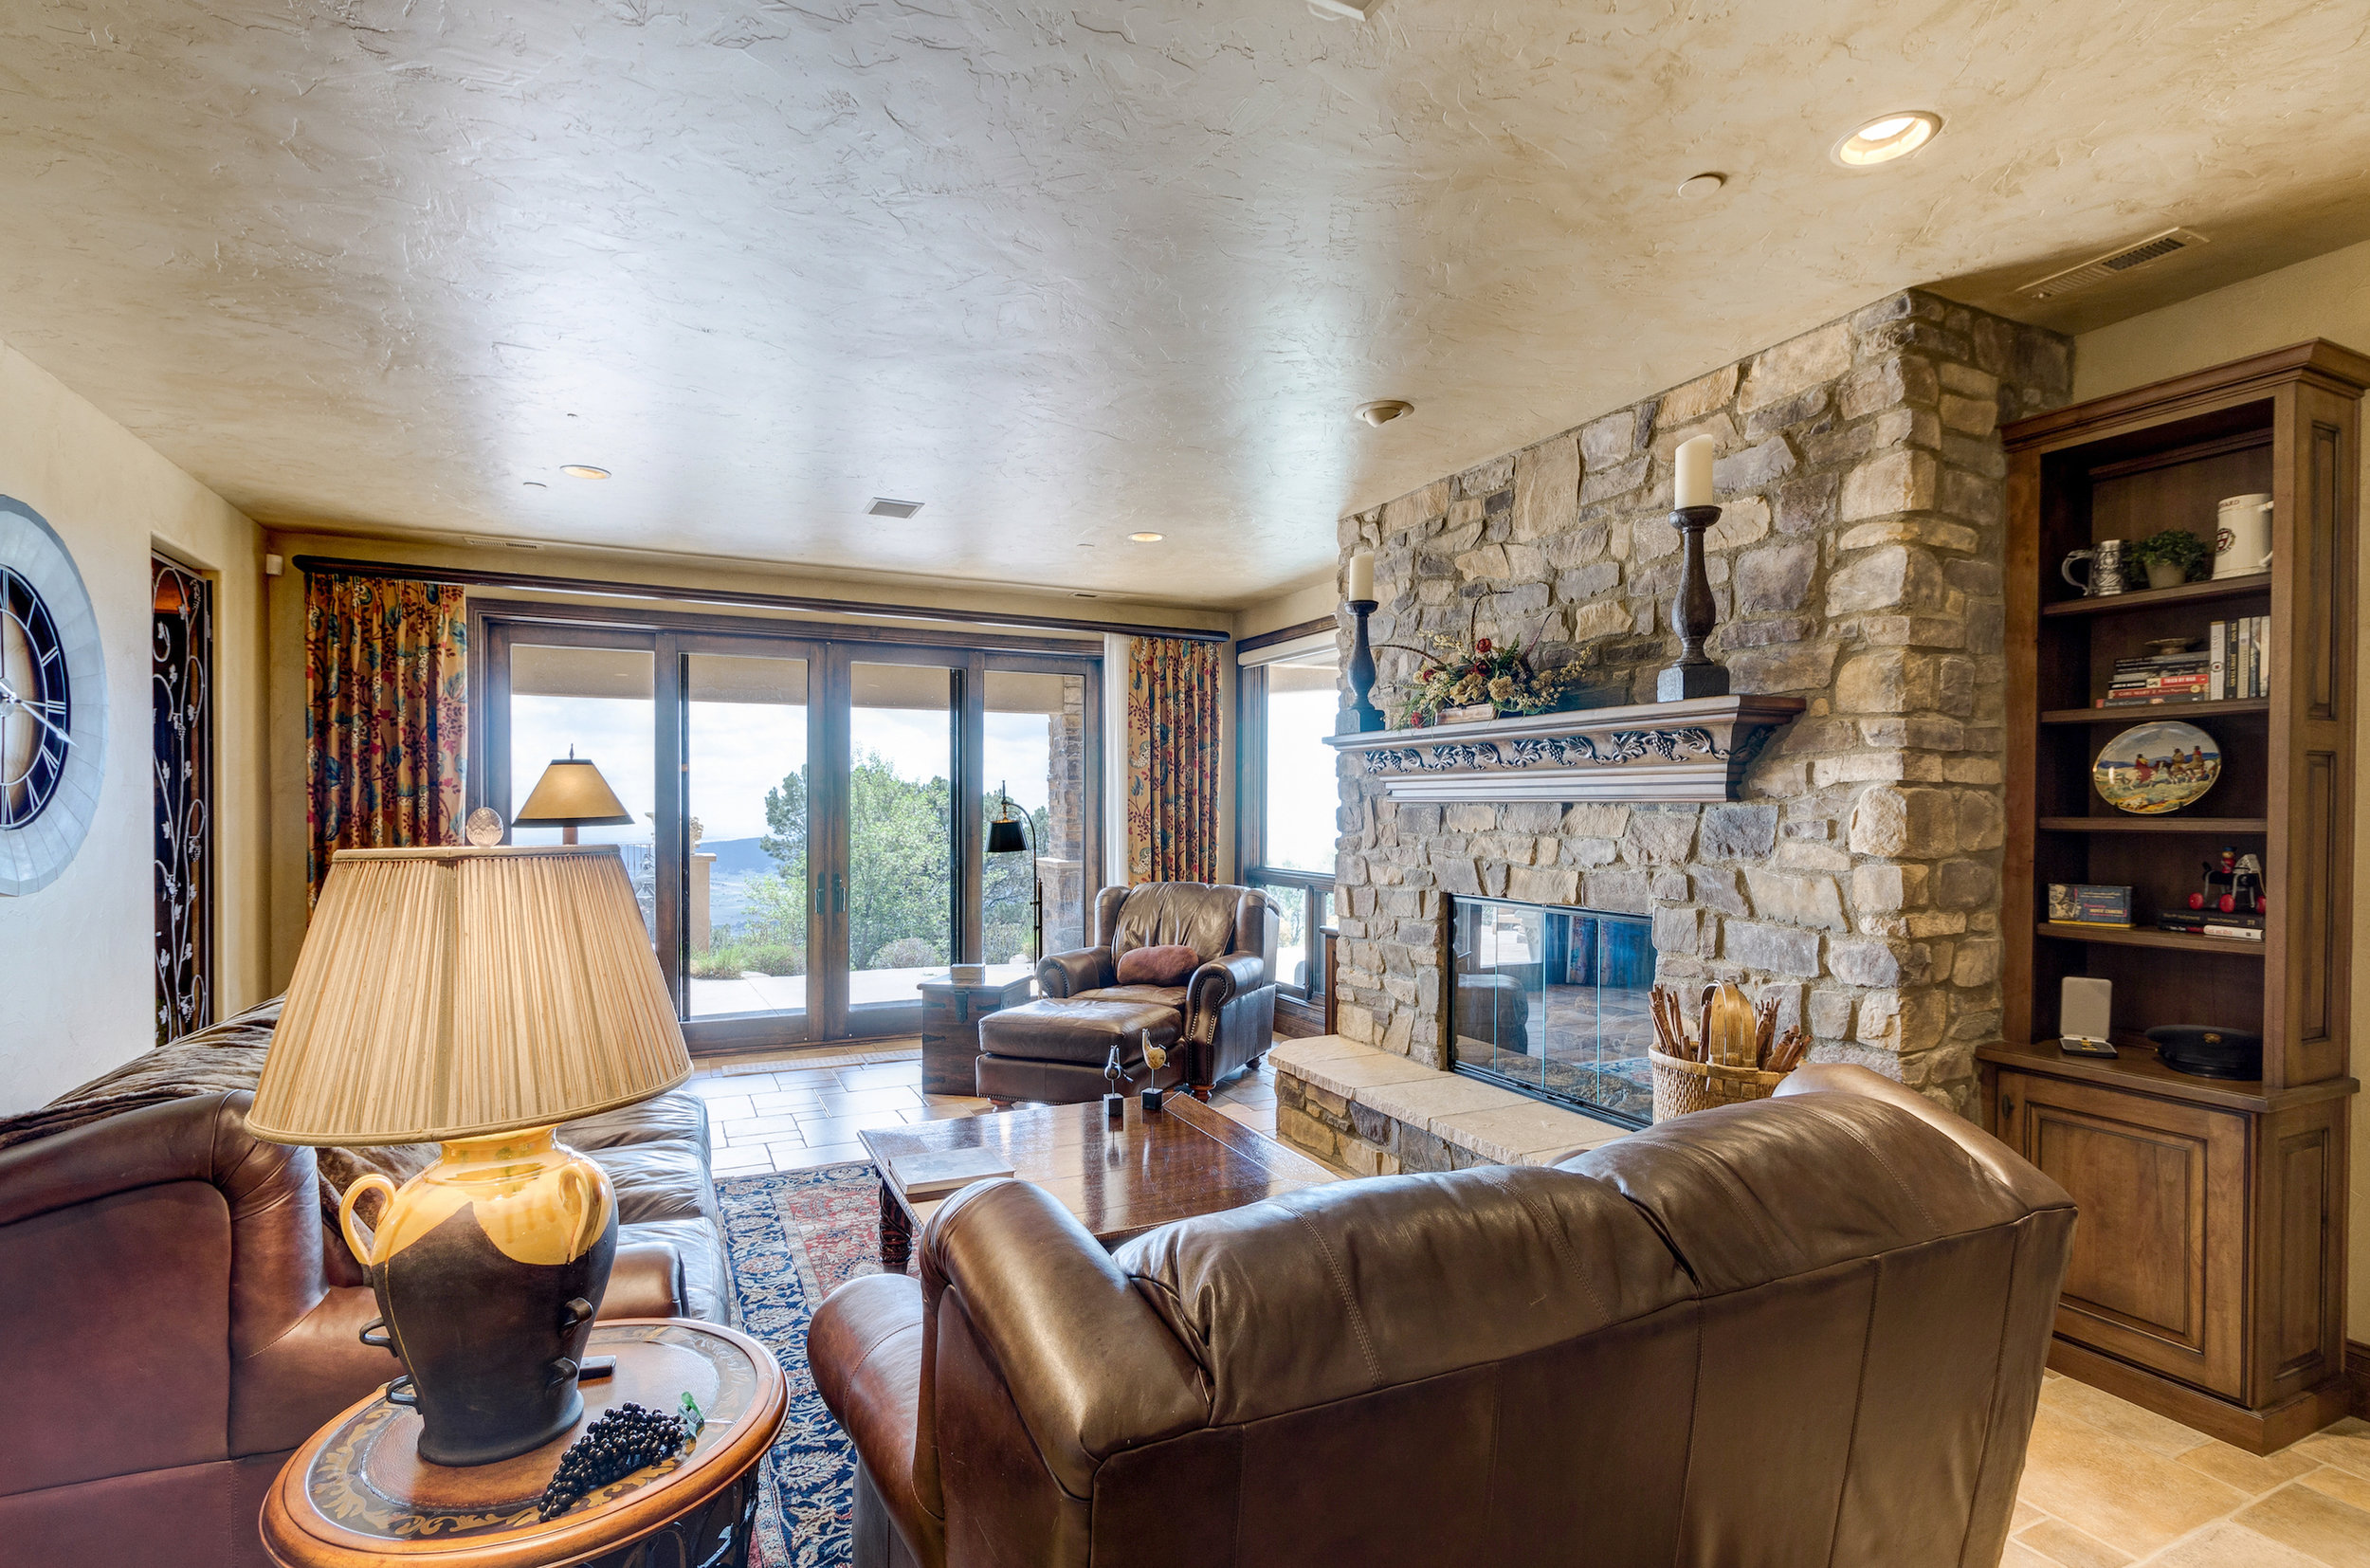 17-Family Room in Basement with wet bar and wine grotto.jpg